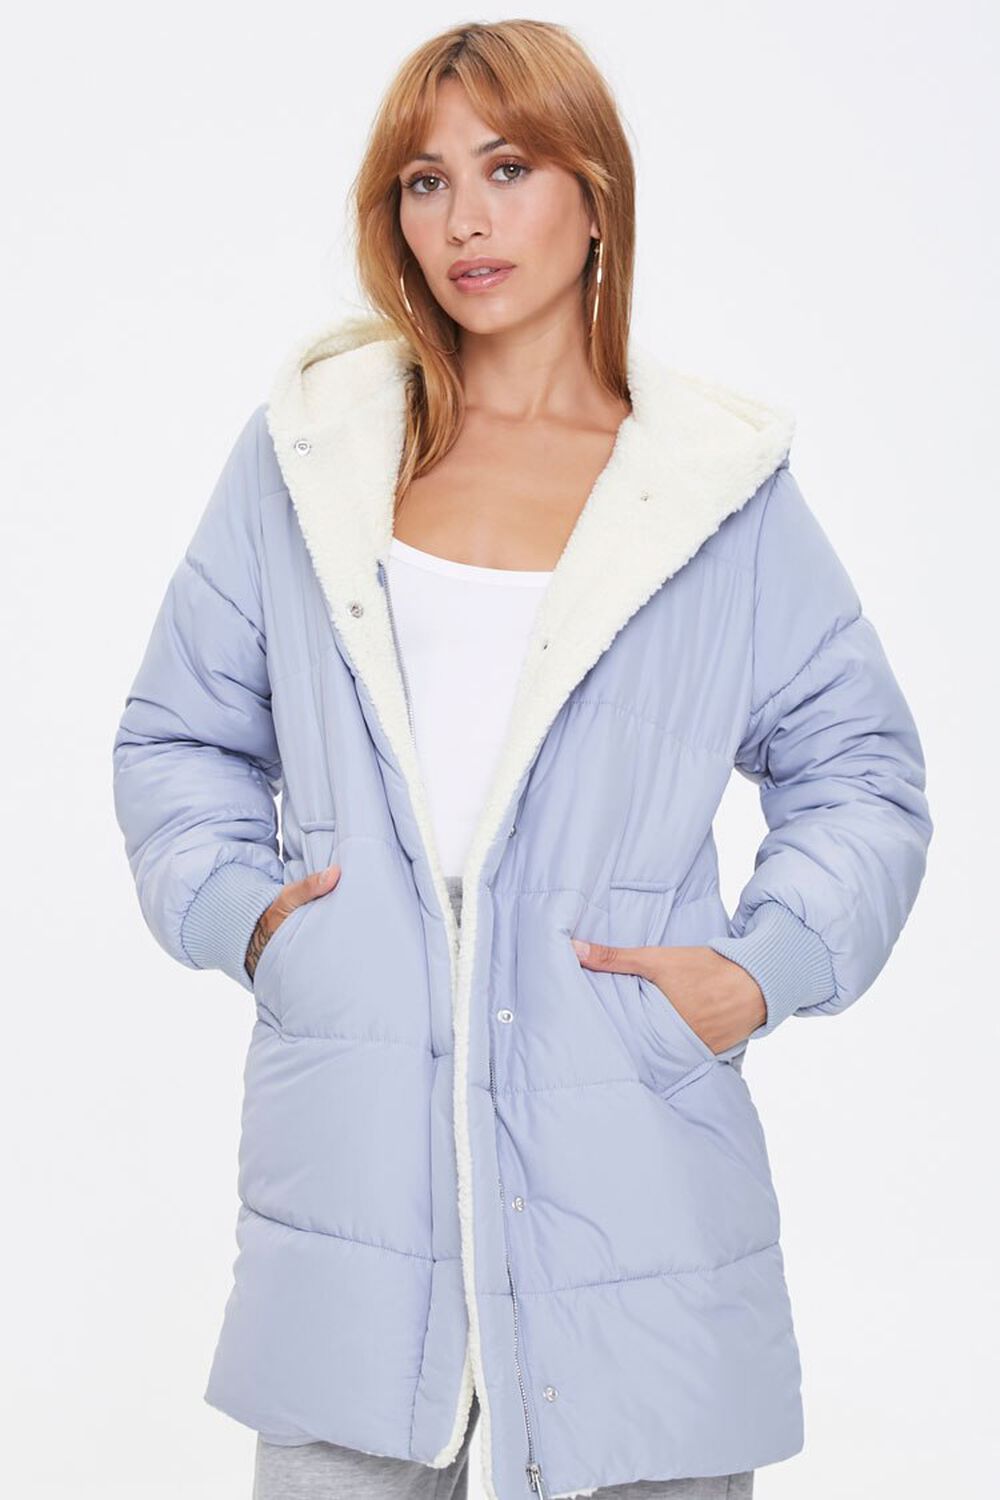 DUSTY BLUE/CREAM Faux Shearling-Lined Puffer Jacket, image 1